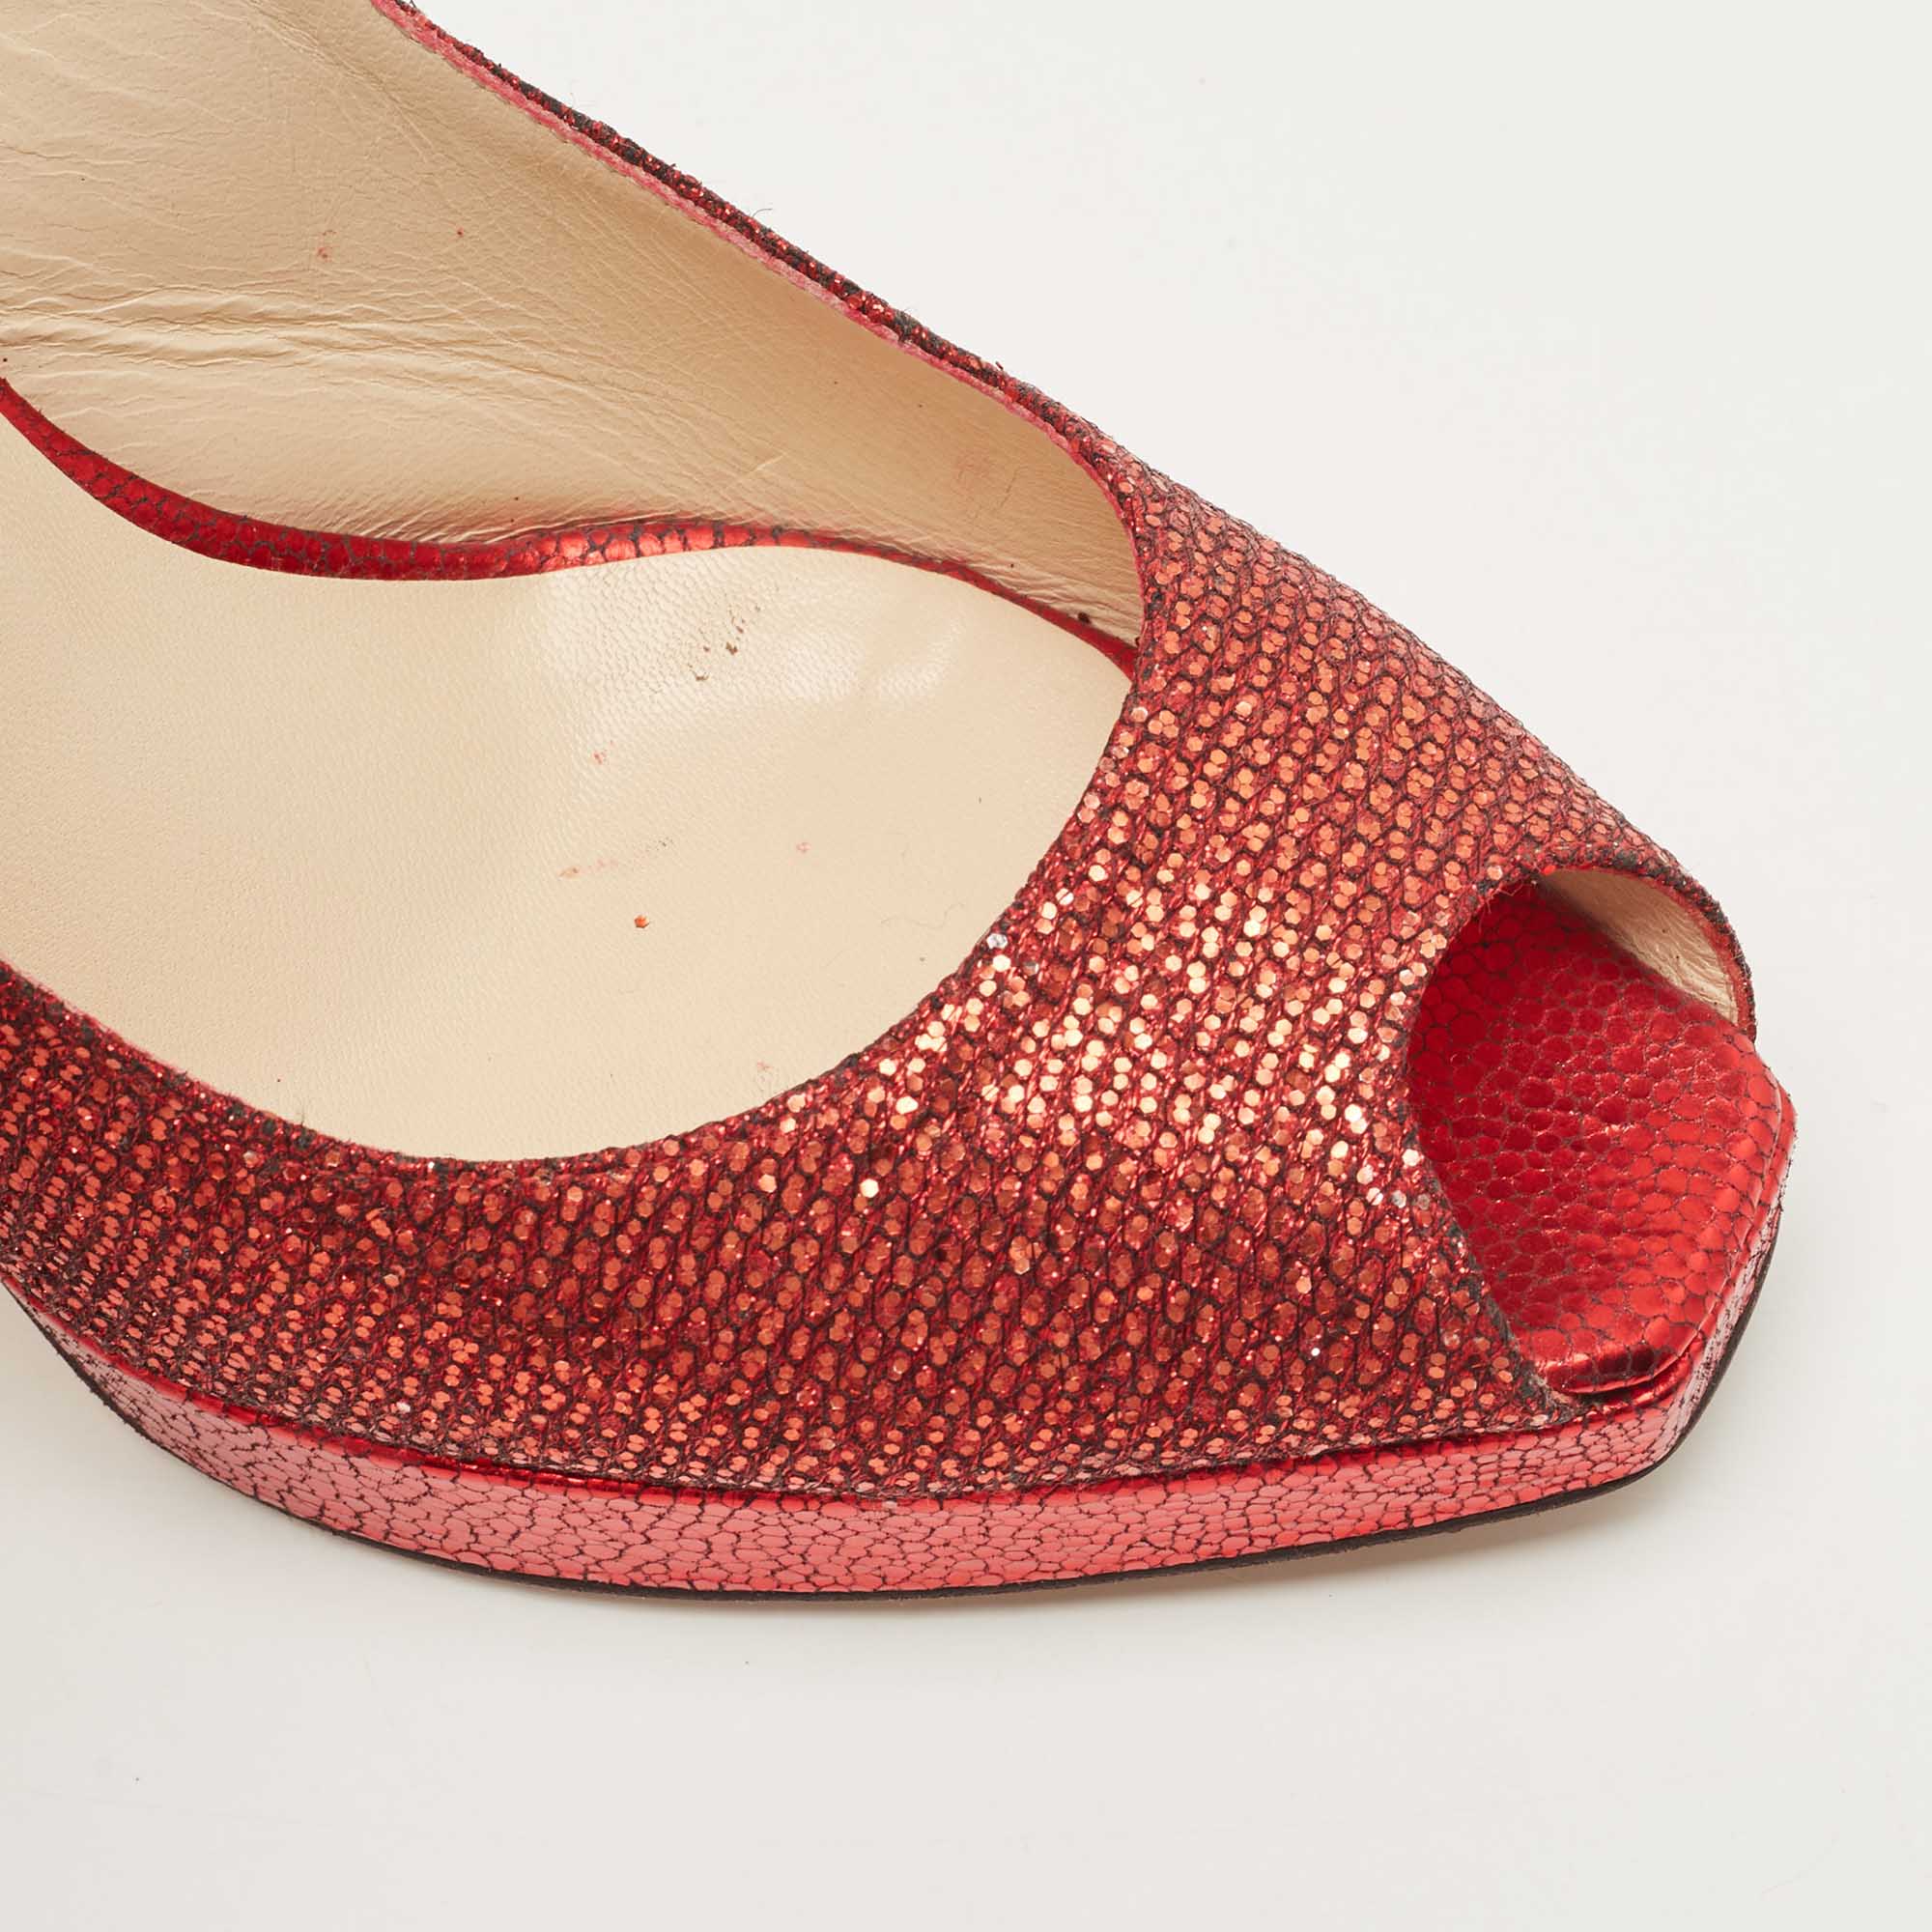 Jimmy Choo Red Glitter And Lame Leather Slingback Pumps Size 39